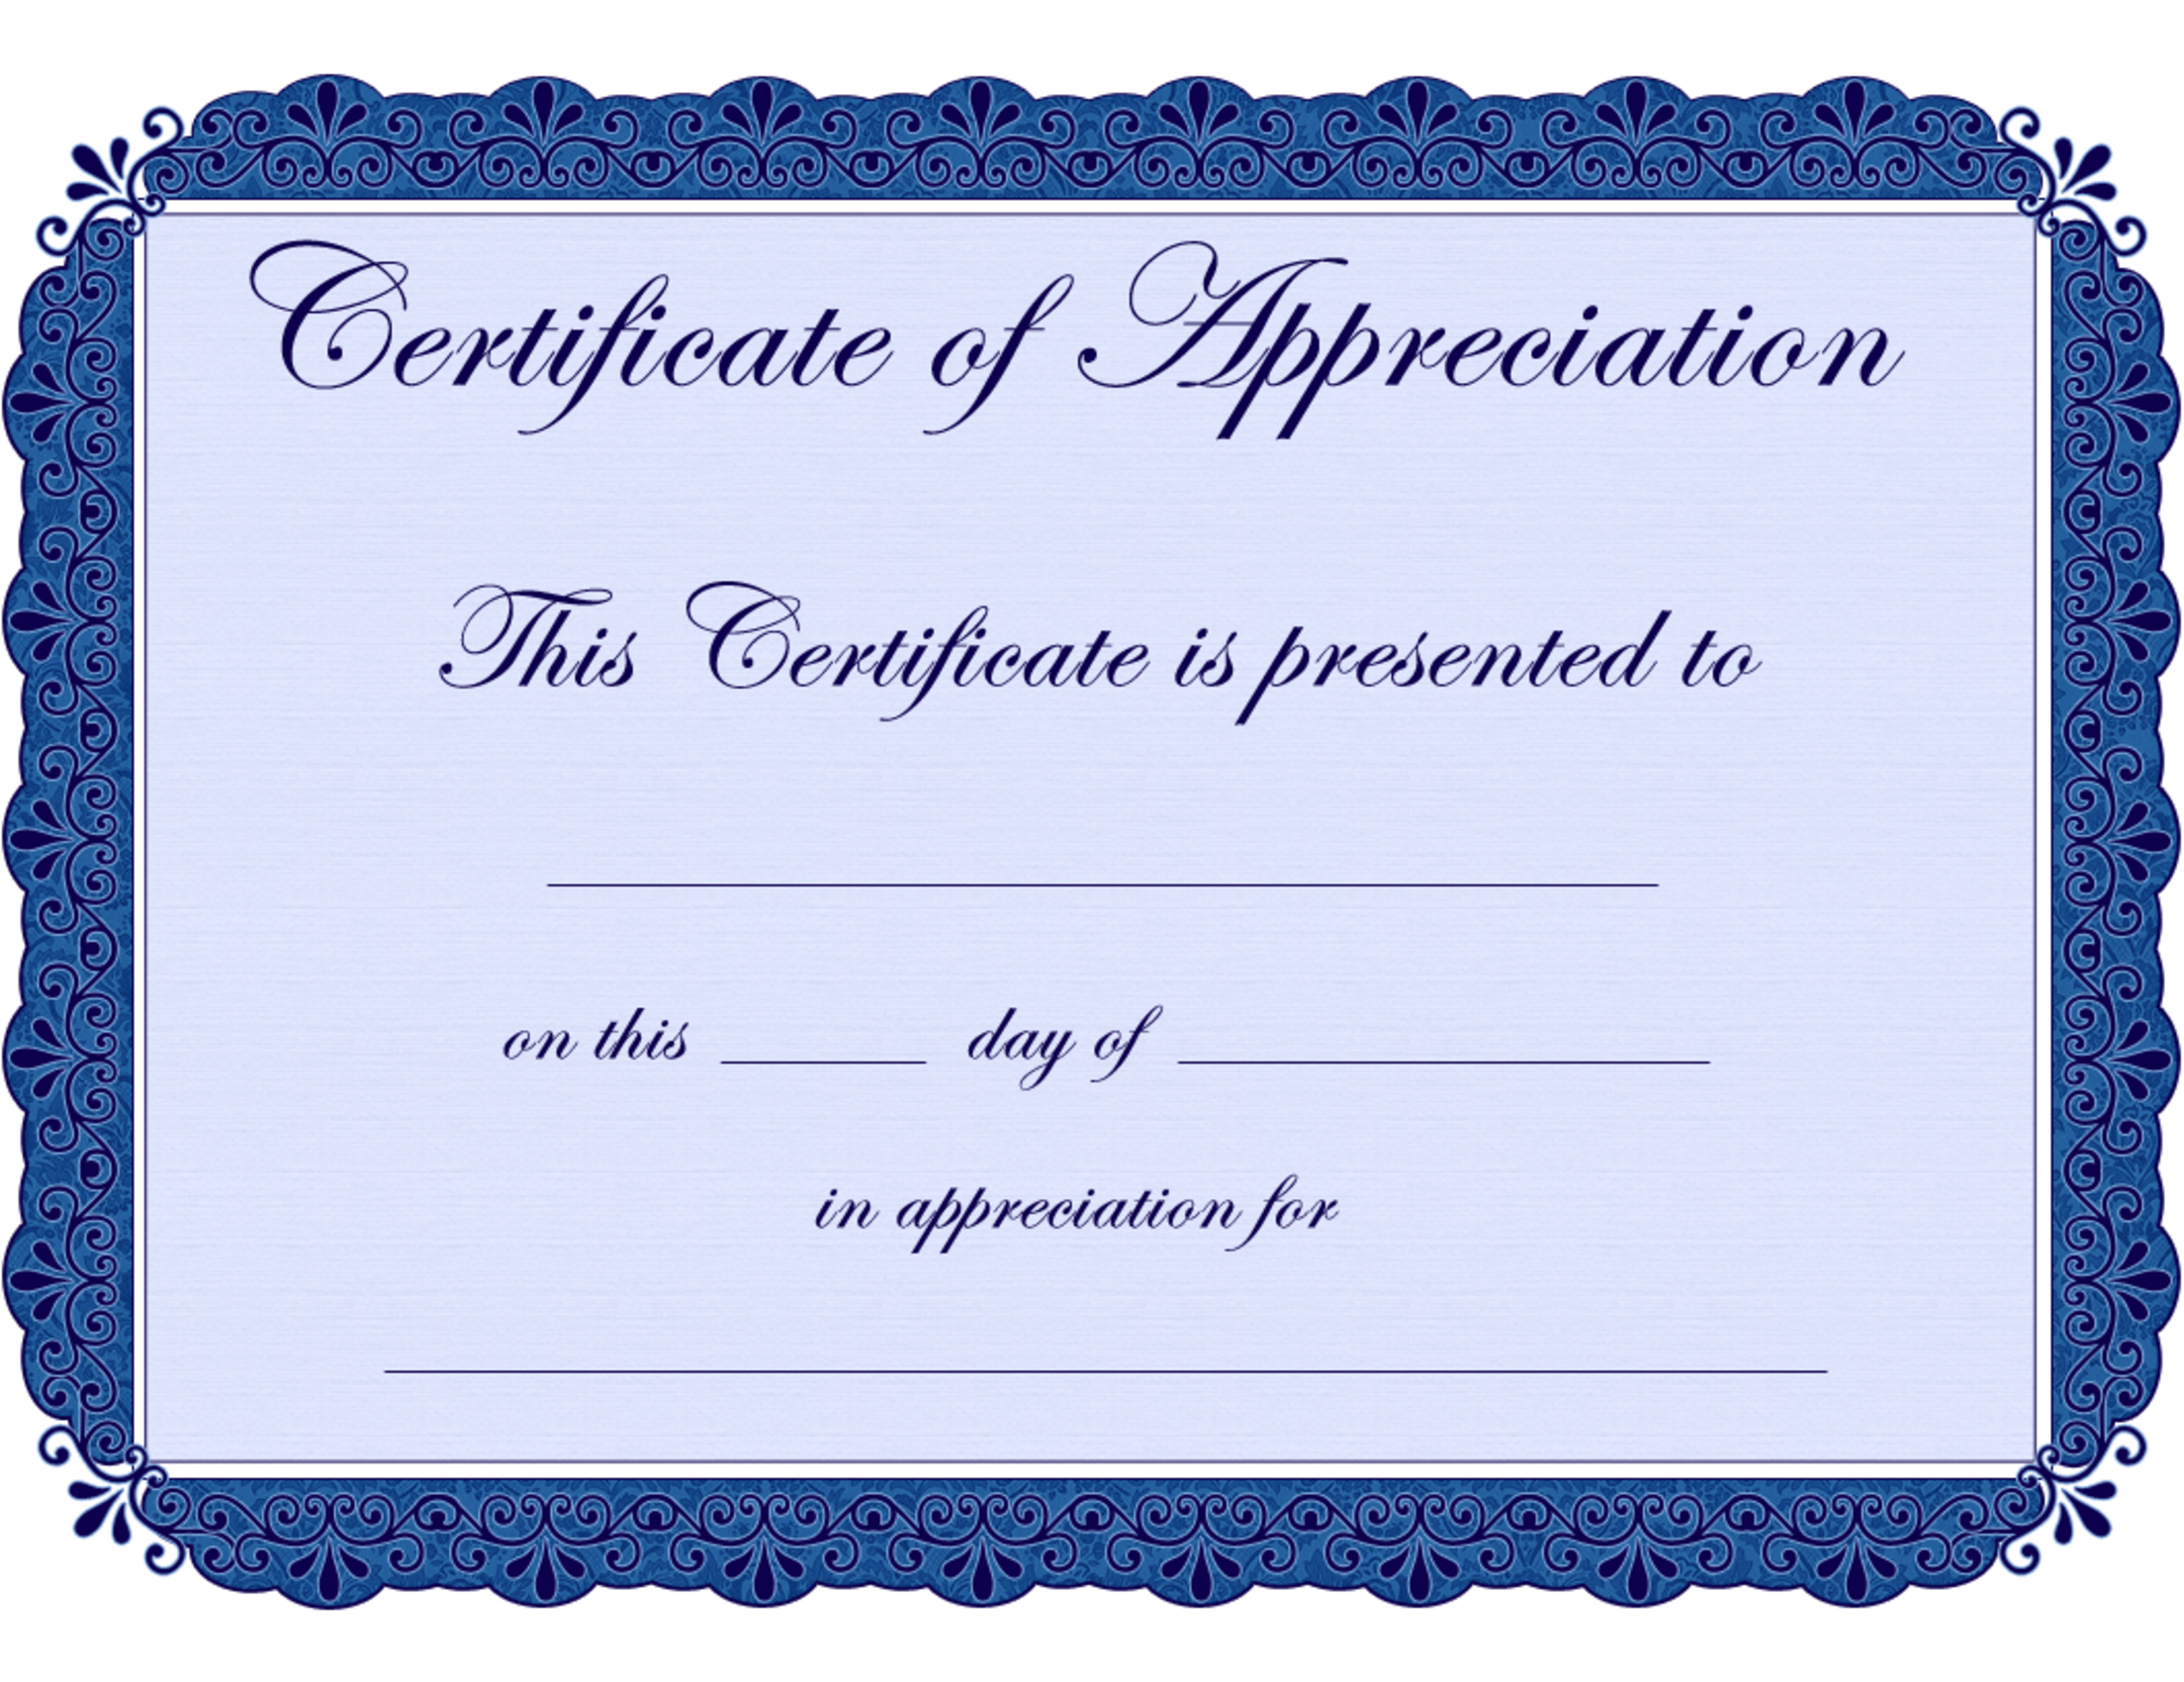 Free Printable Certificates Certificate Of Appreciation Certificate - Free Printable Certificates For Students